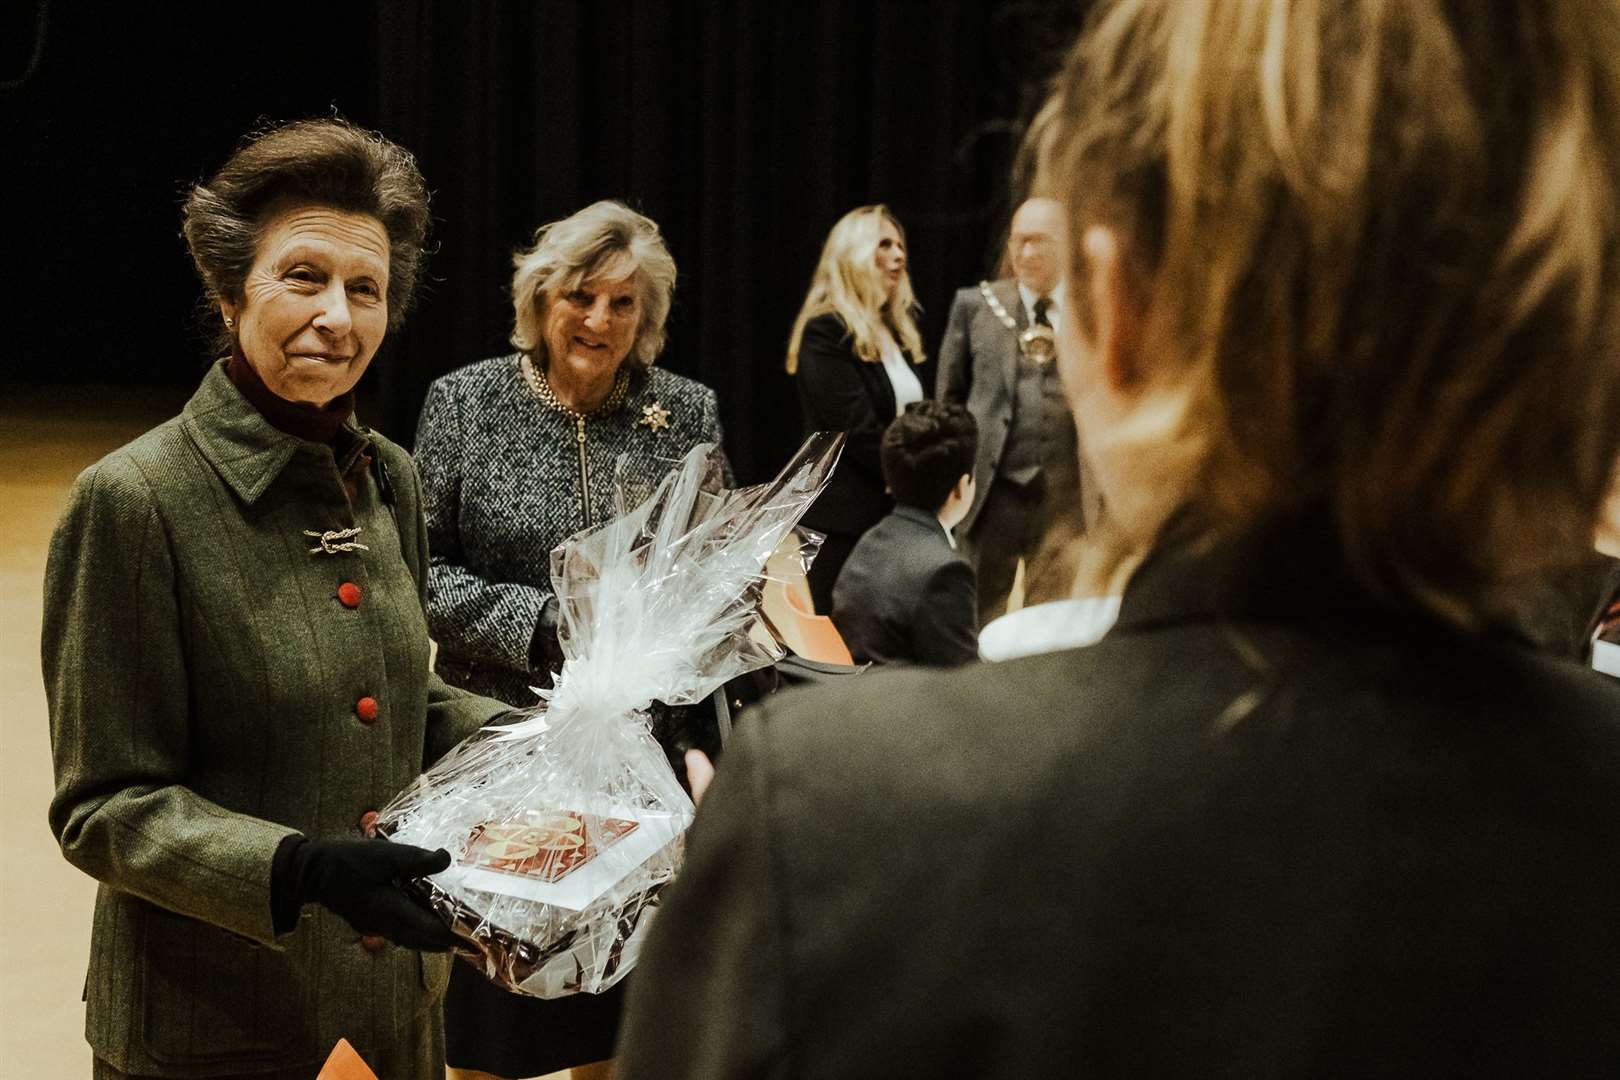 Princess Anne visited The Royal Harbour Academy, Ramsgate. Picture: Matt Ebbage Photography